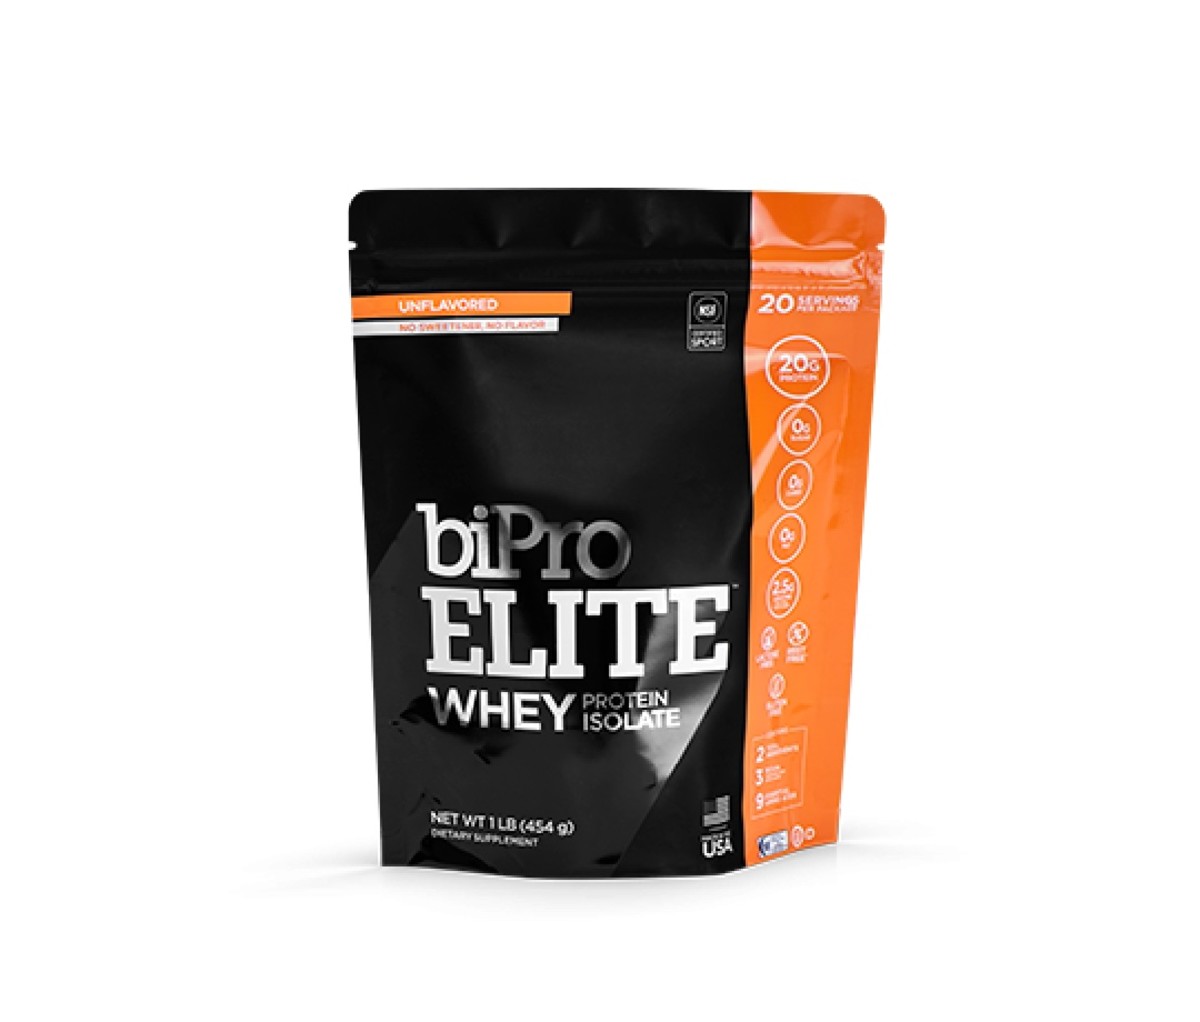 biPro whey protein isolate is also known as one of the best clean protein powder that has the same two ingredients: whey protein isolate and sunflower lecithin.